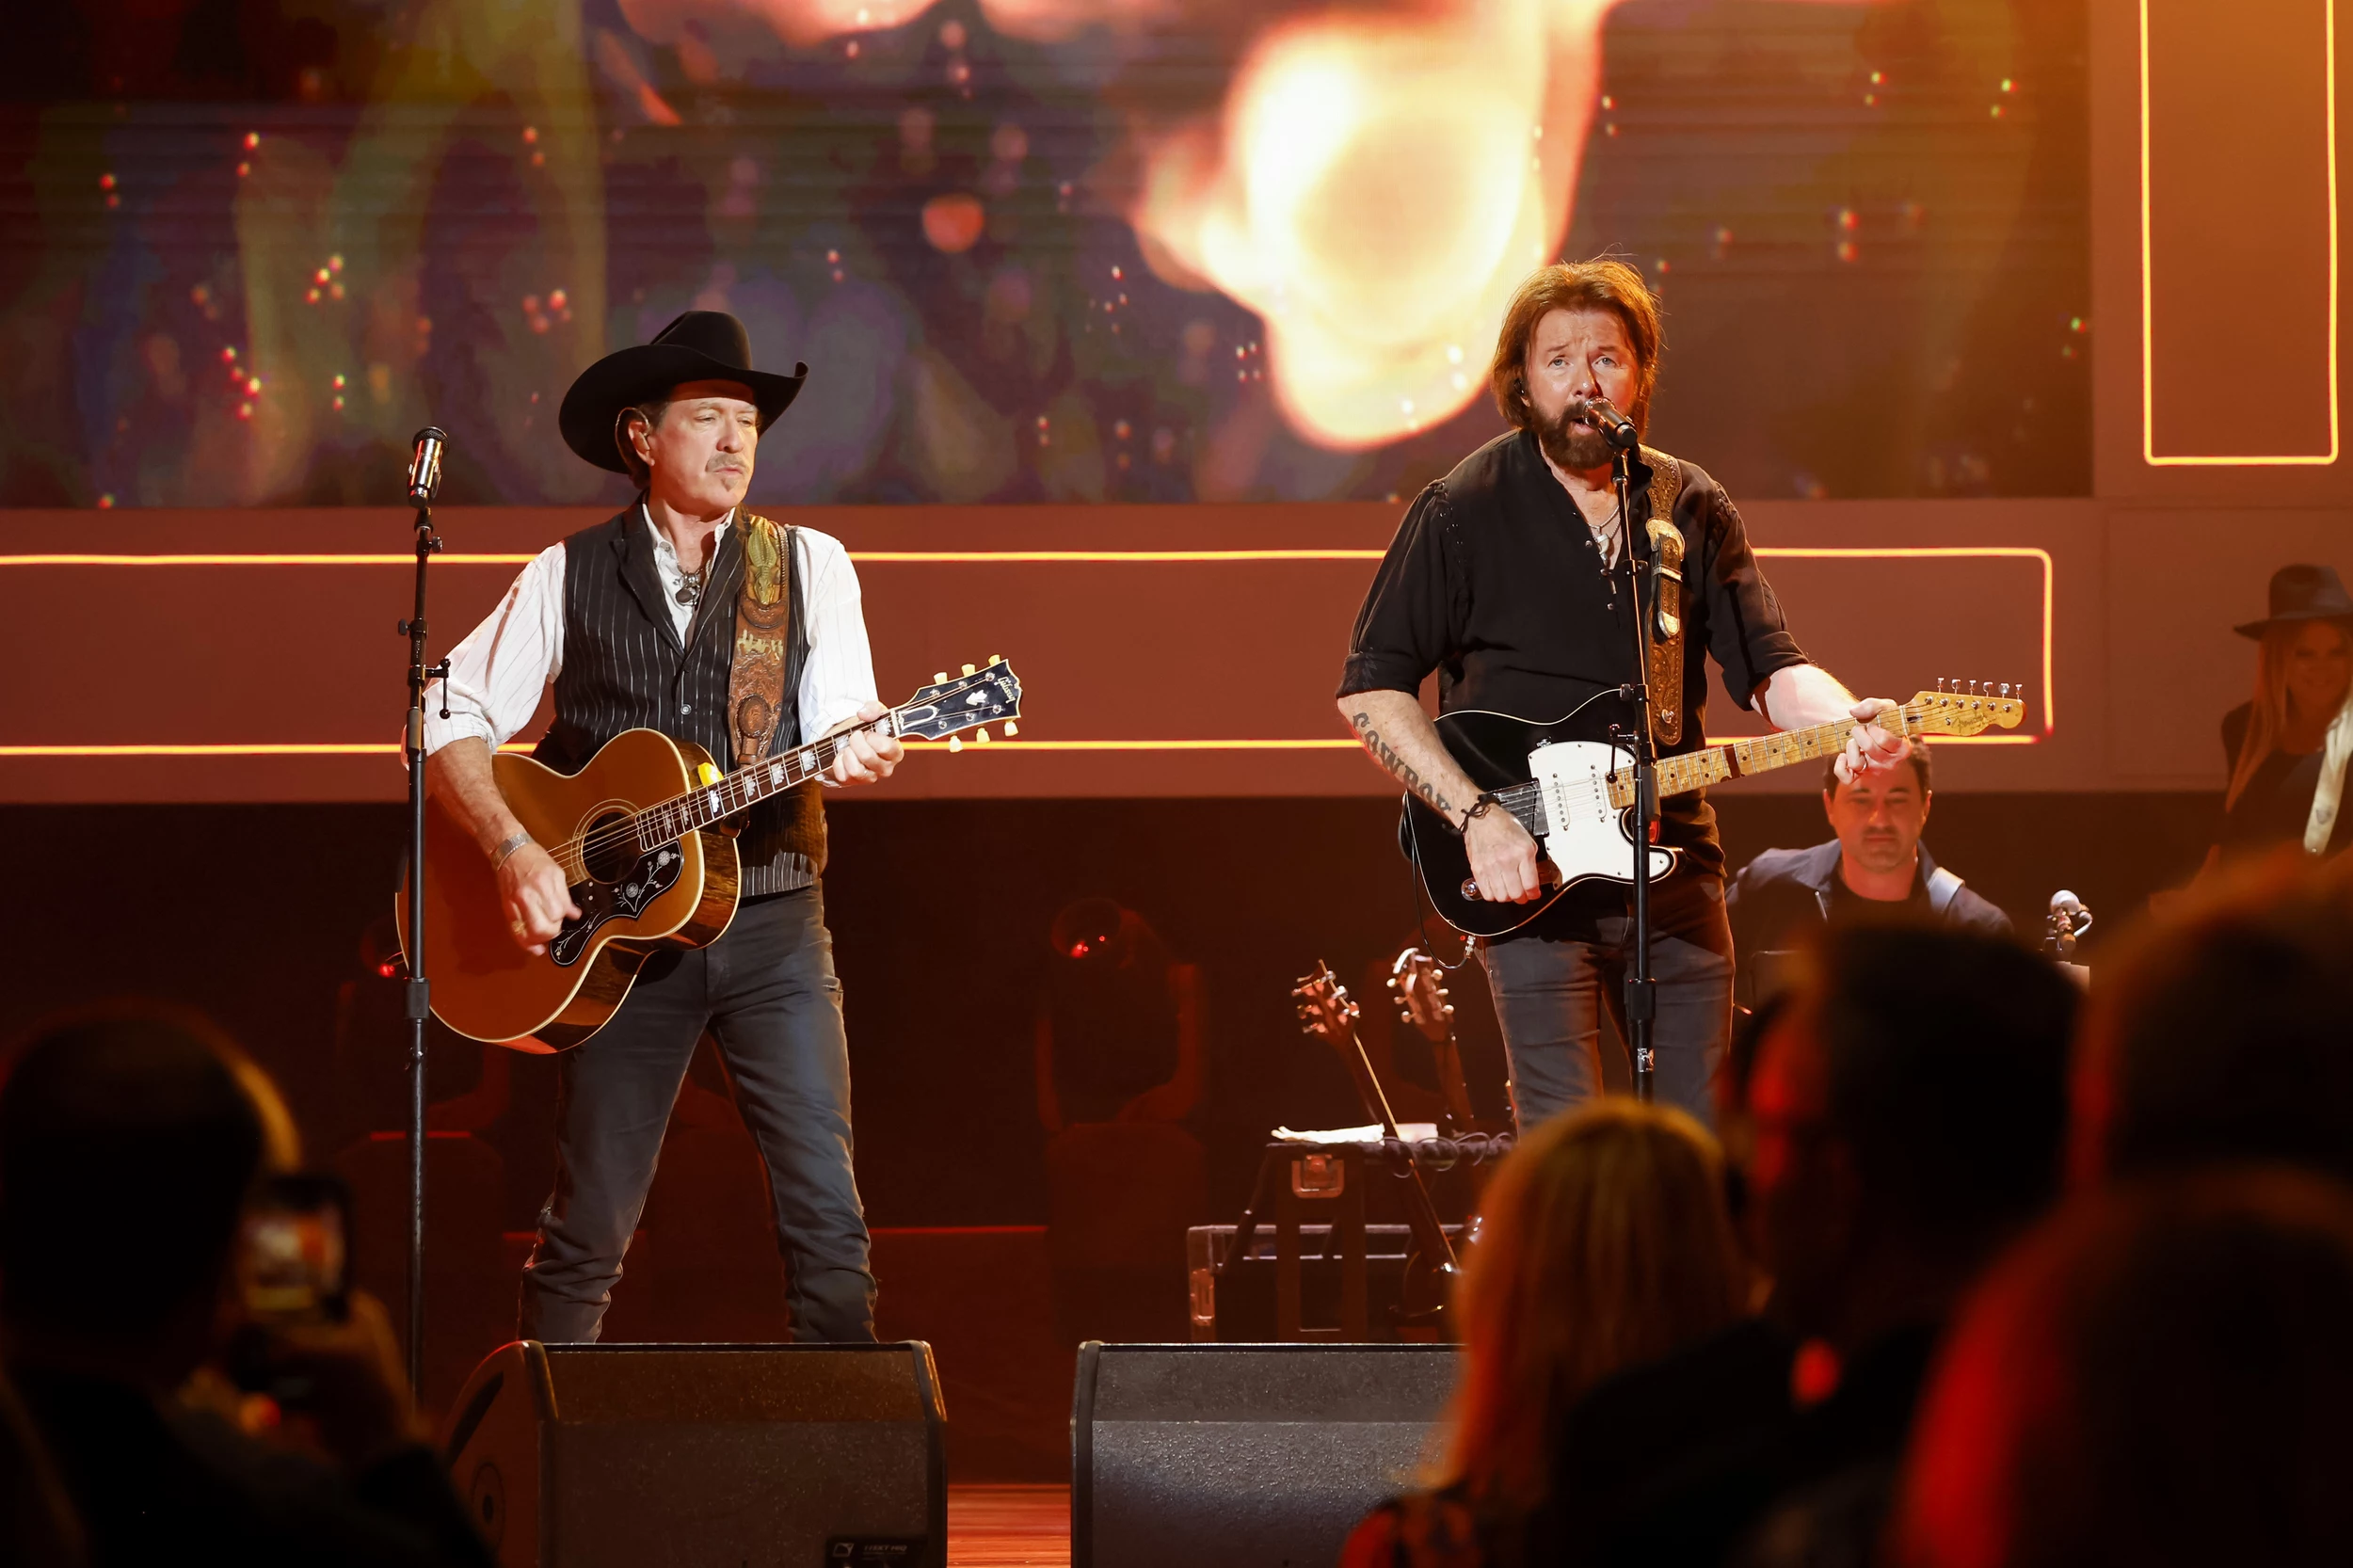 Get Brooks + Dunn Tickets For St. Paul With B105 Presale Code